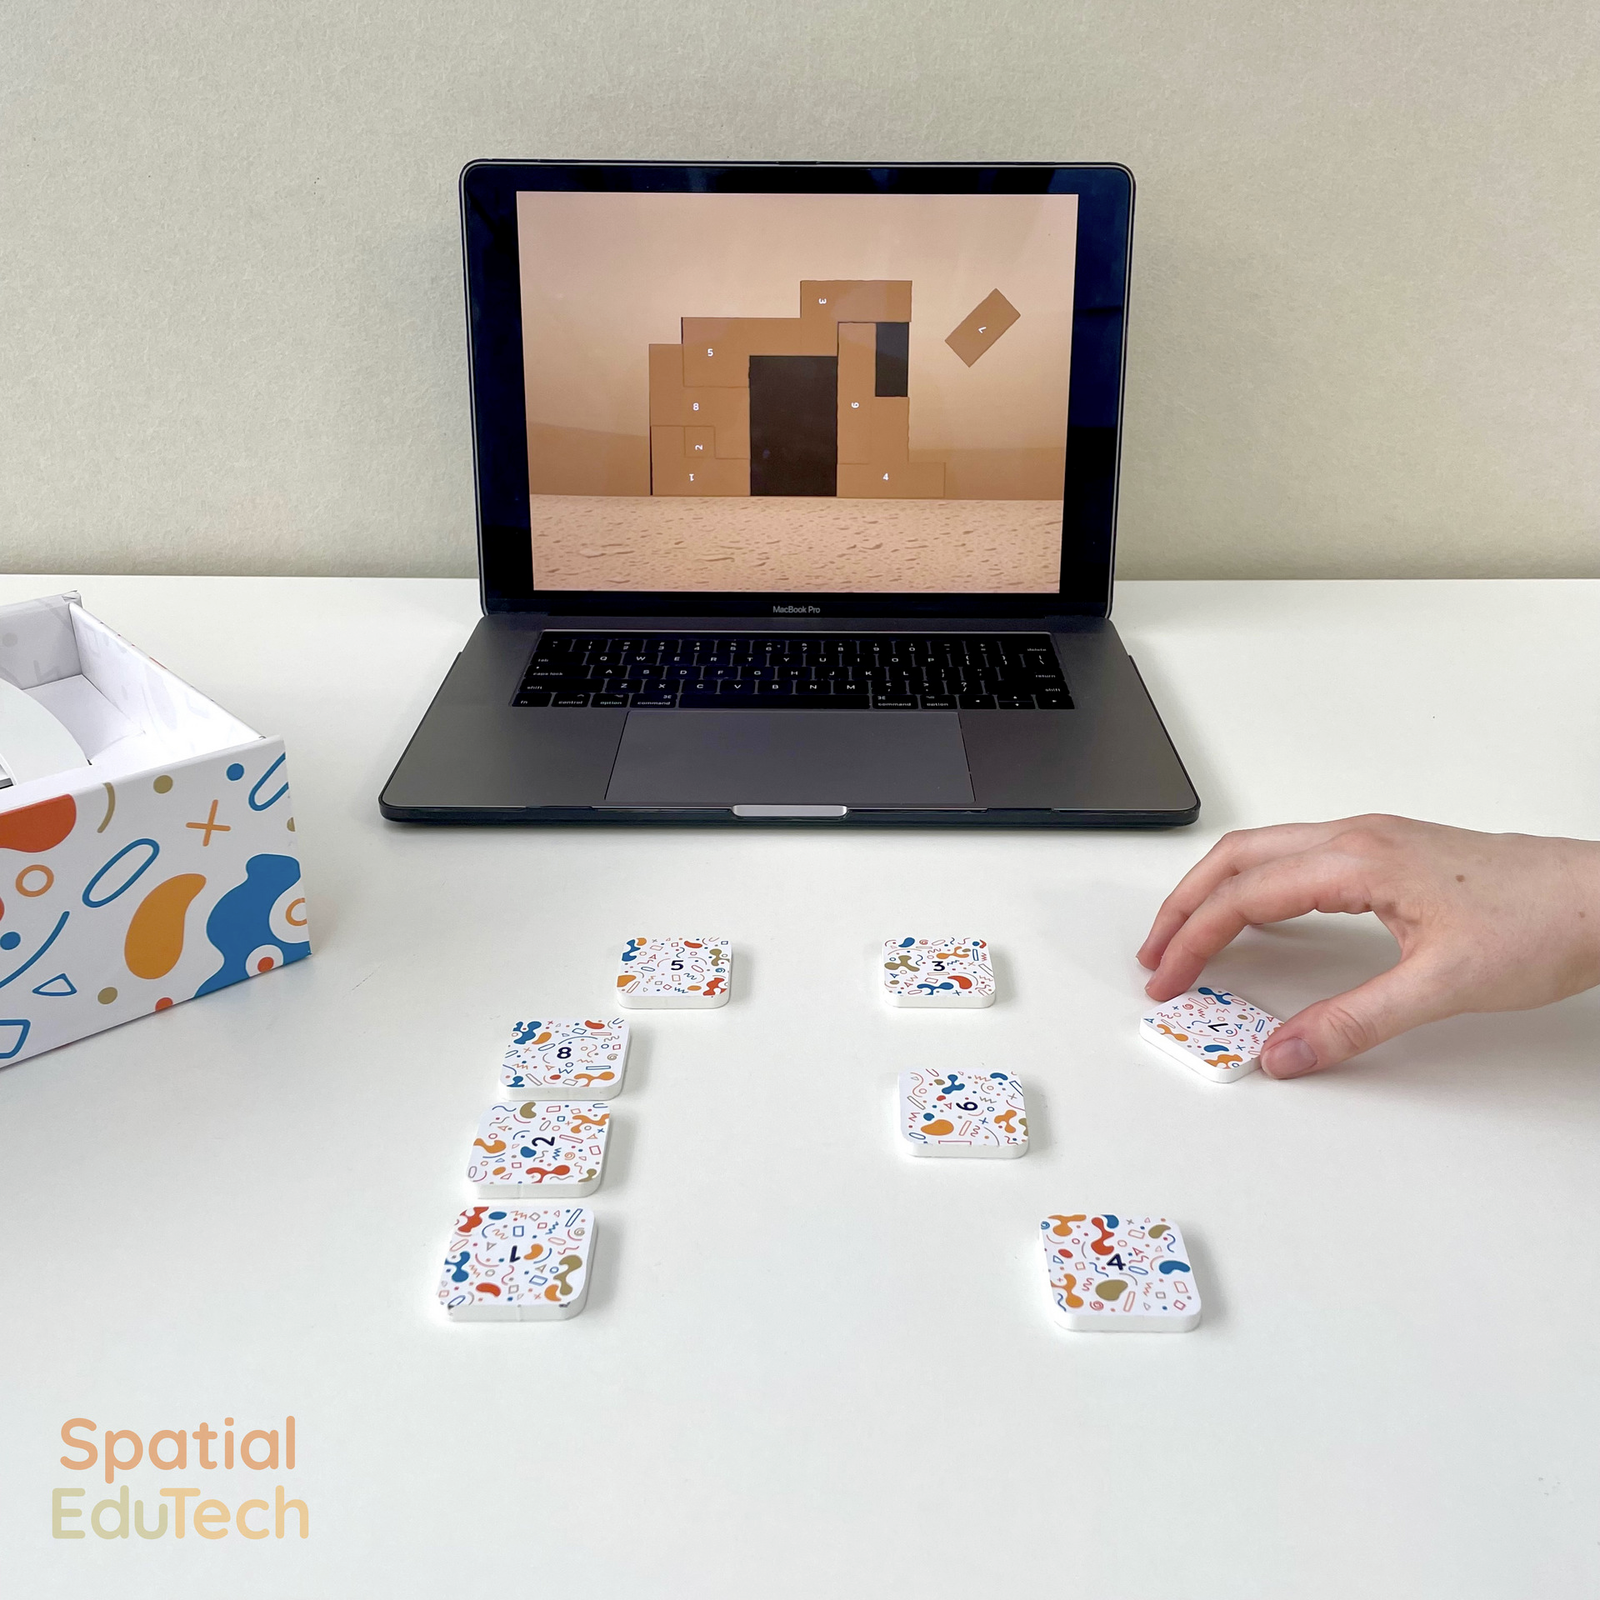 A tiling puzzle on a laptop with physical game pieces in front, with a hand positioning a piece to solve the digital puzzle.